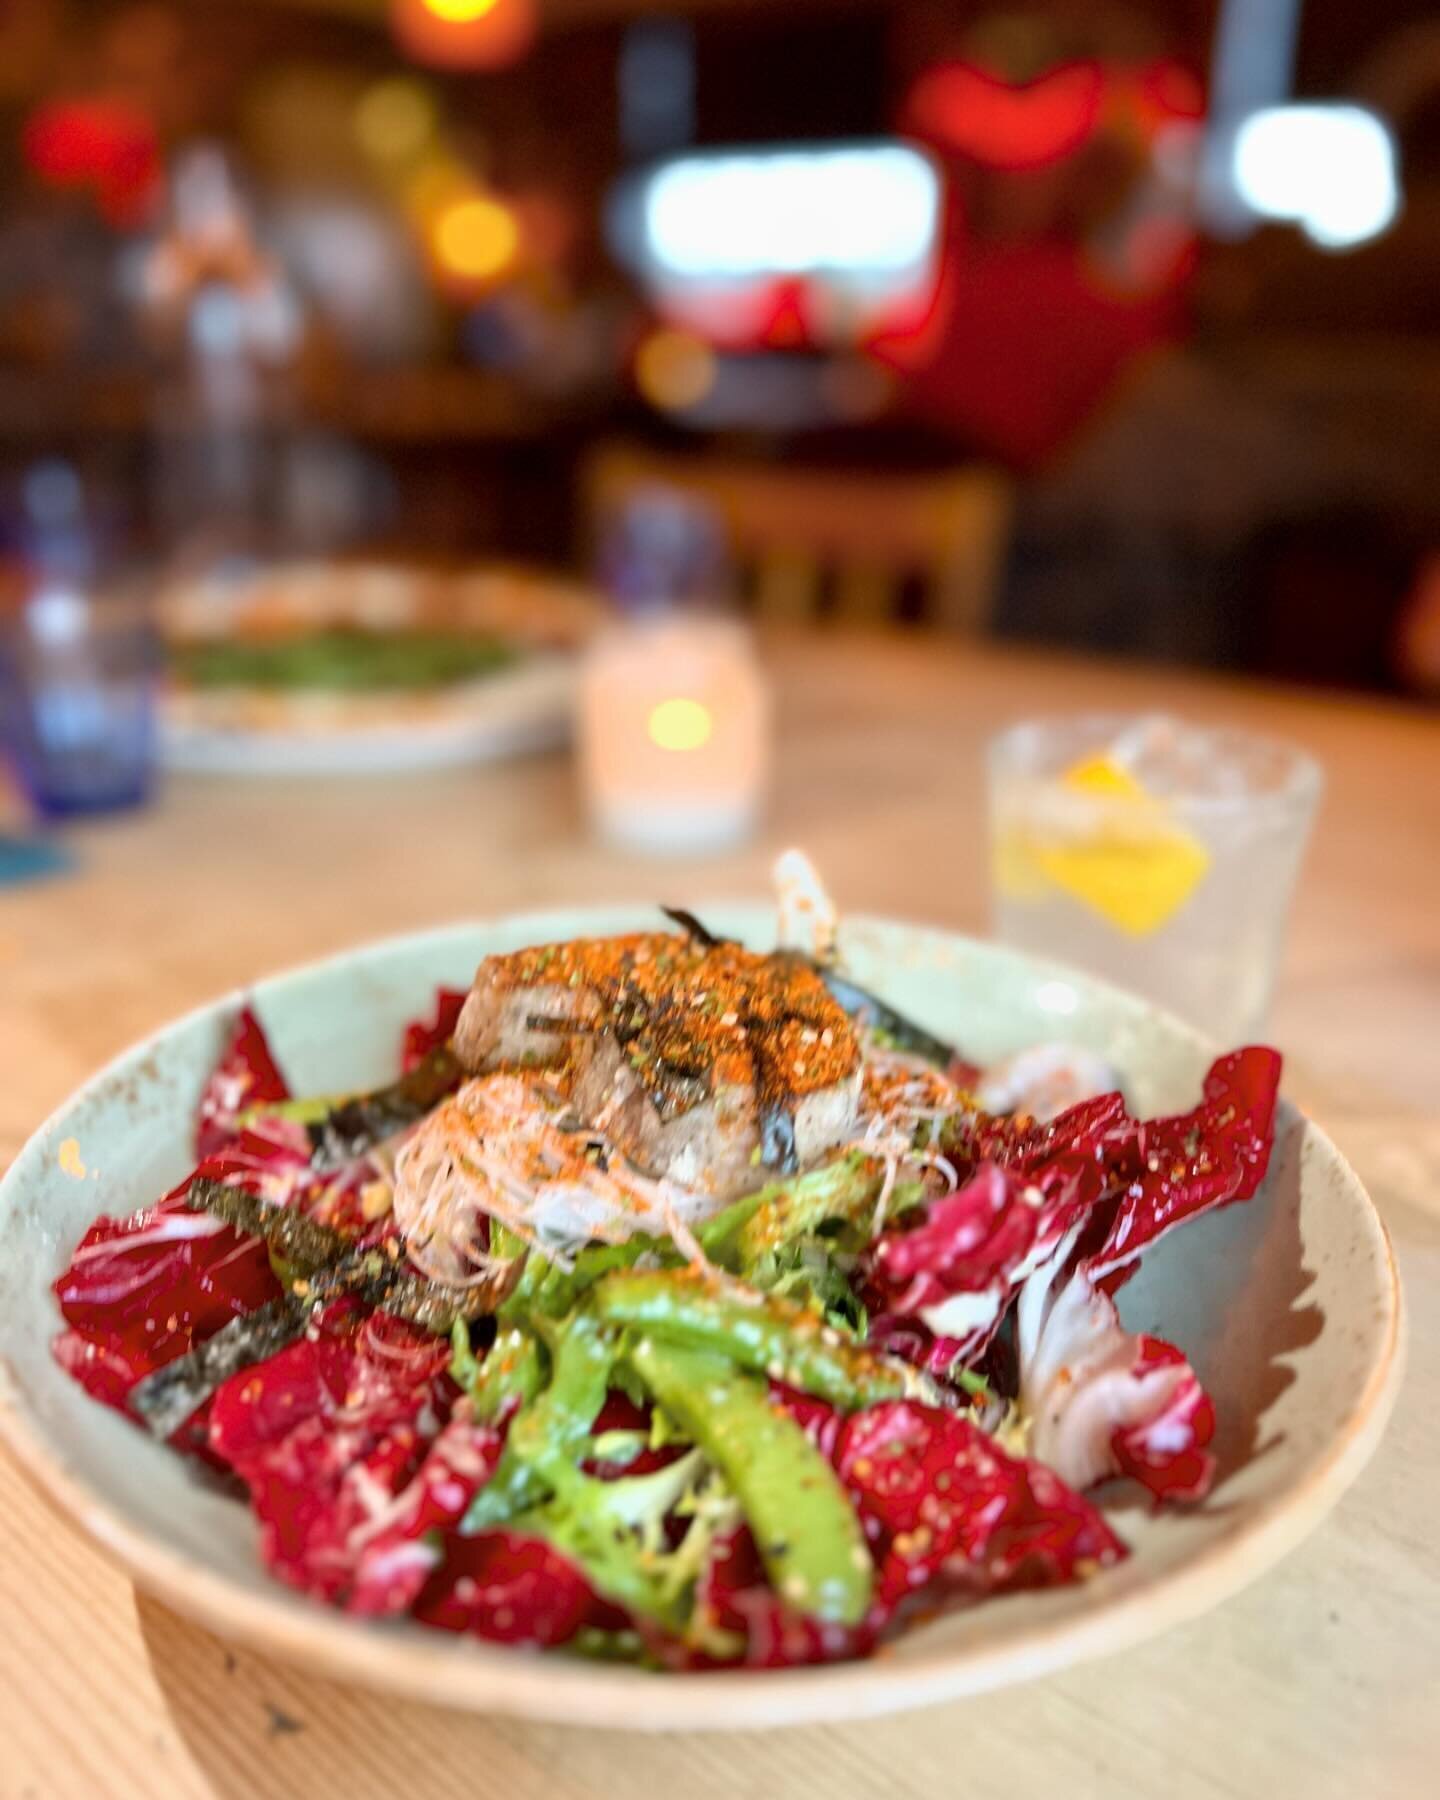 🌼 Hello to April - bringing in delicious new salads &amp; our ever so popular monthly pizza &amp; cocktail specials!🌿NEW Herby crispy halloumi salad with grilled asparagus, roasted red peppers, capers, toasted pumpkin seeds,rocket &amp; salsa verde